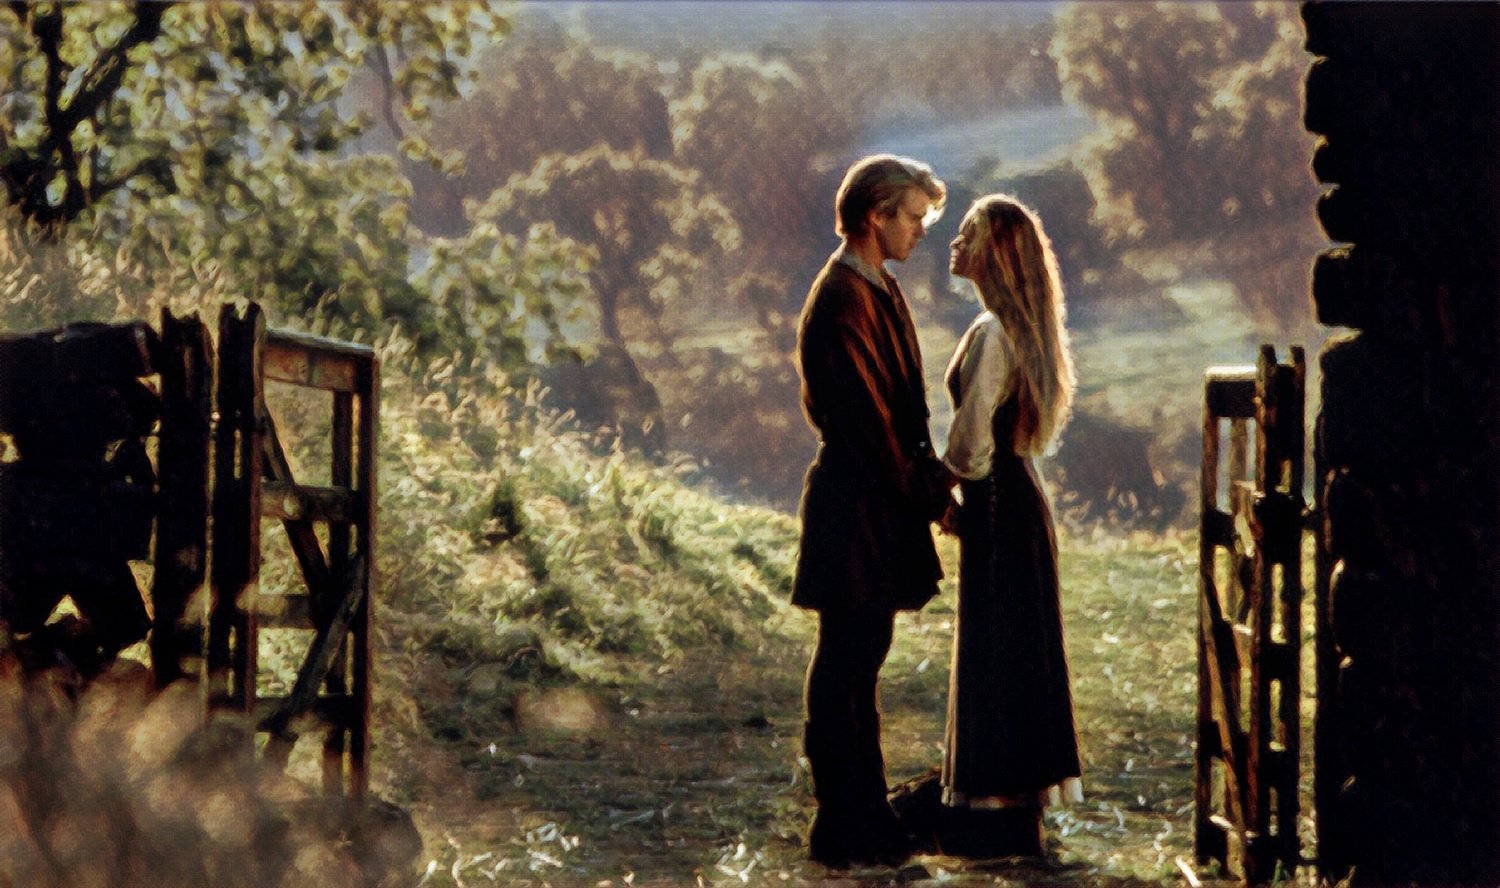 The Princess Bride, minutes 84 to 86